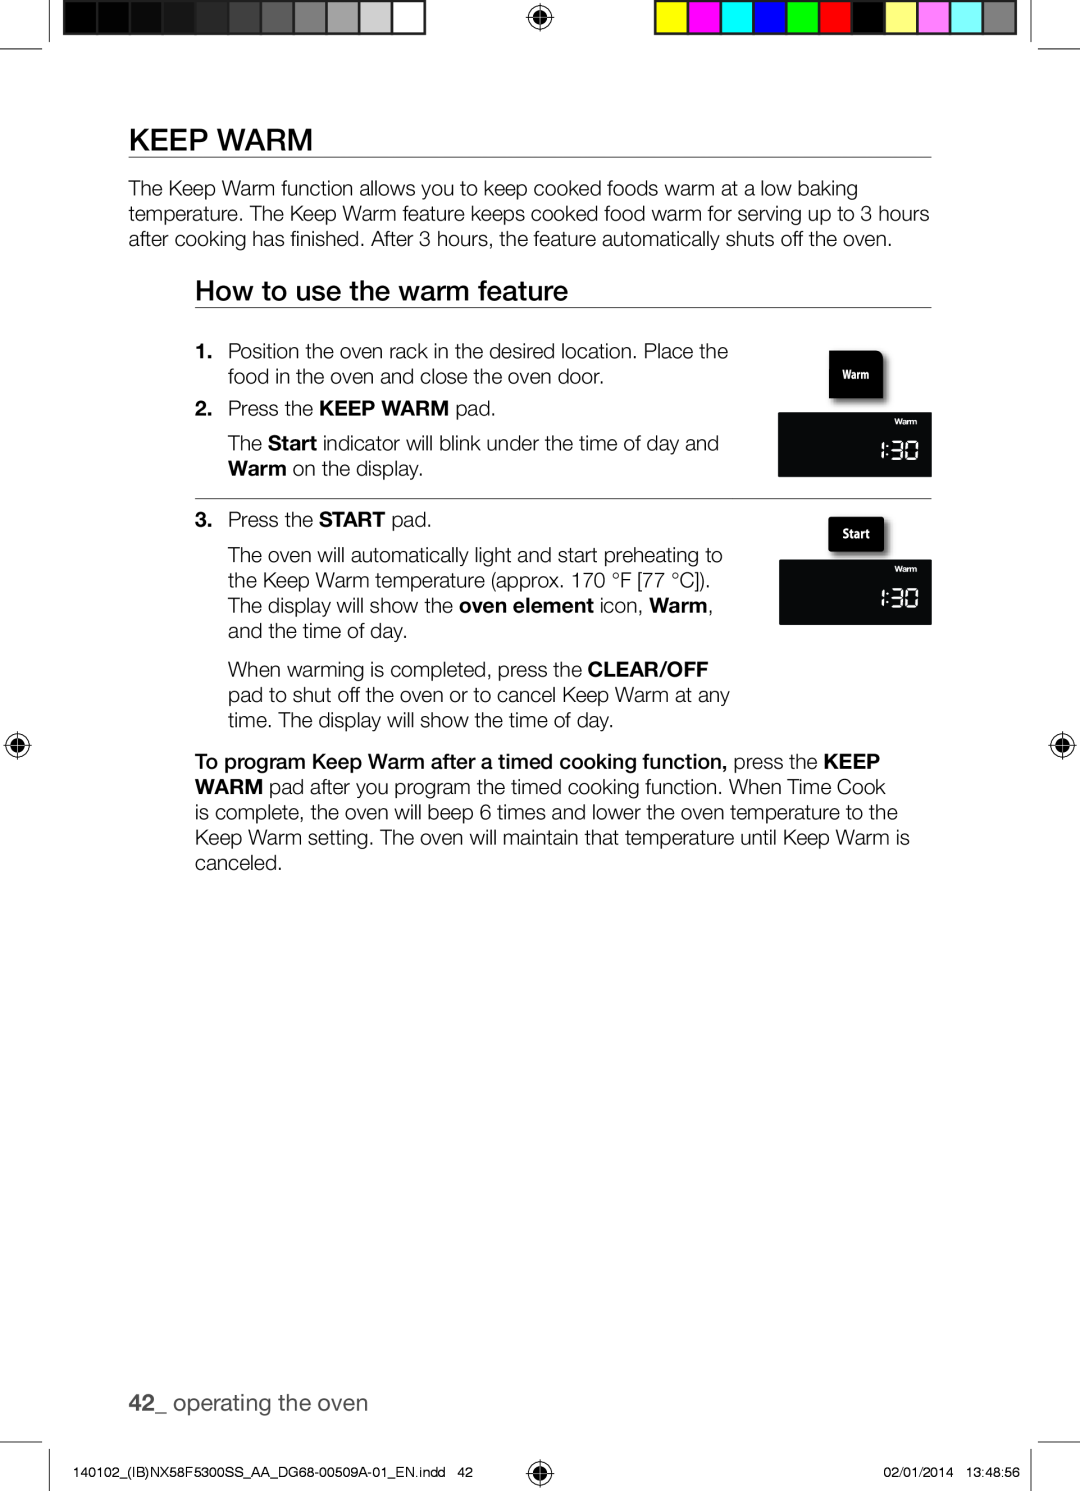 Samsung NX58F5500SW user manual Keep Warm, How to use the warm feature, operating the oven 